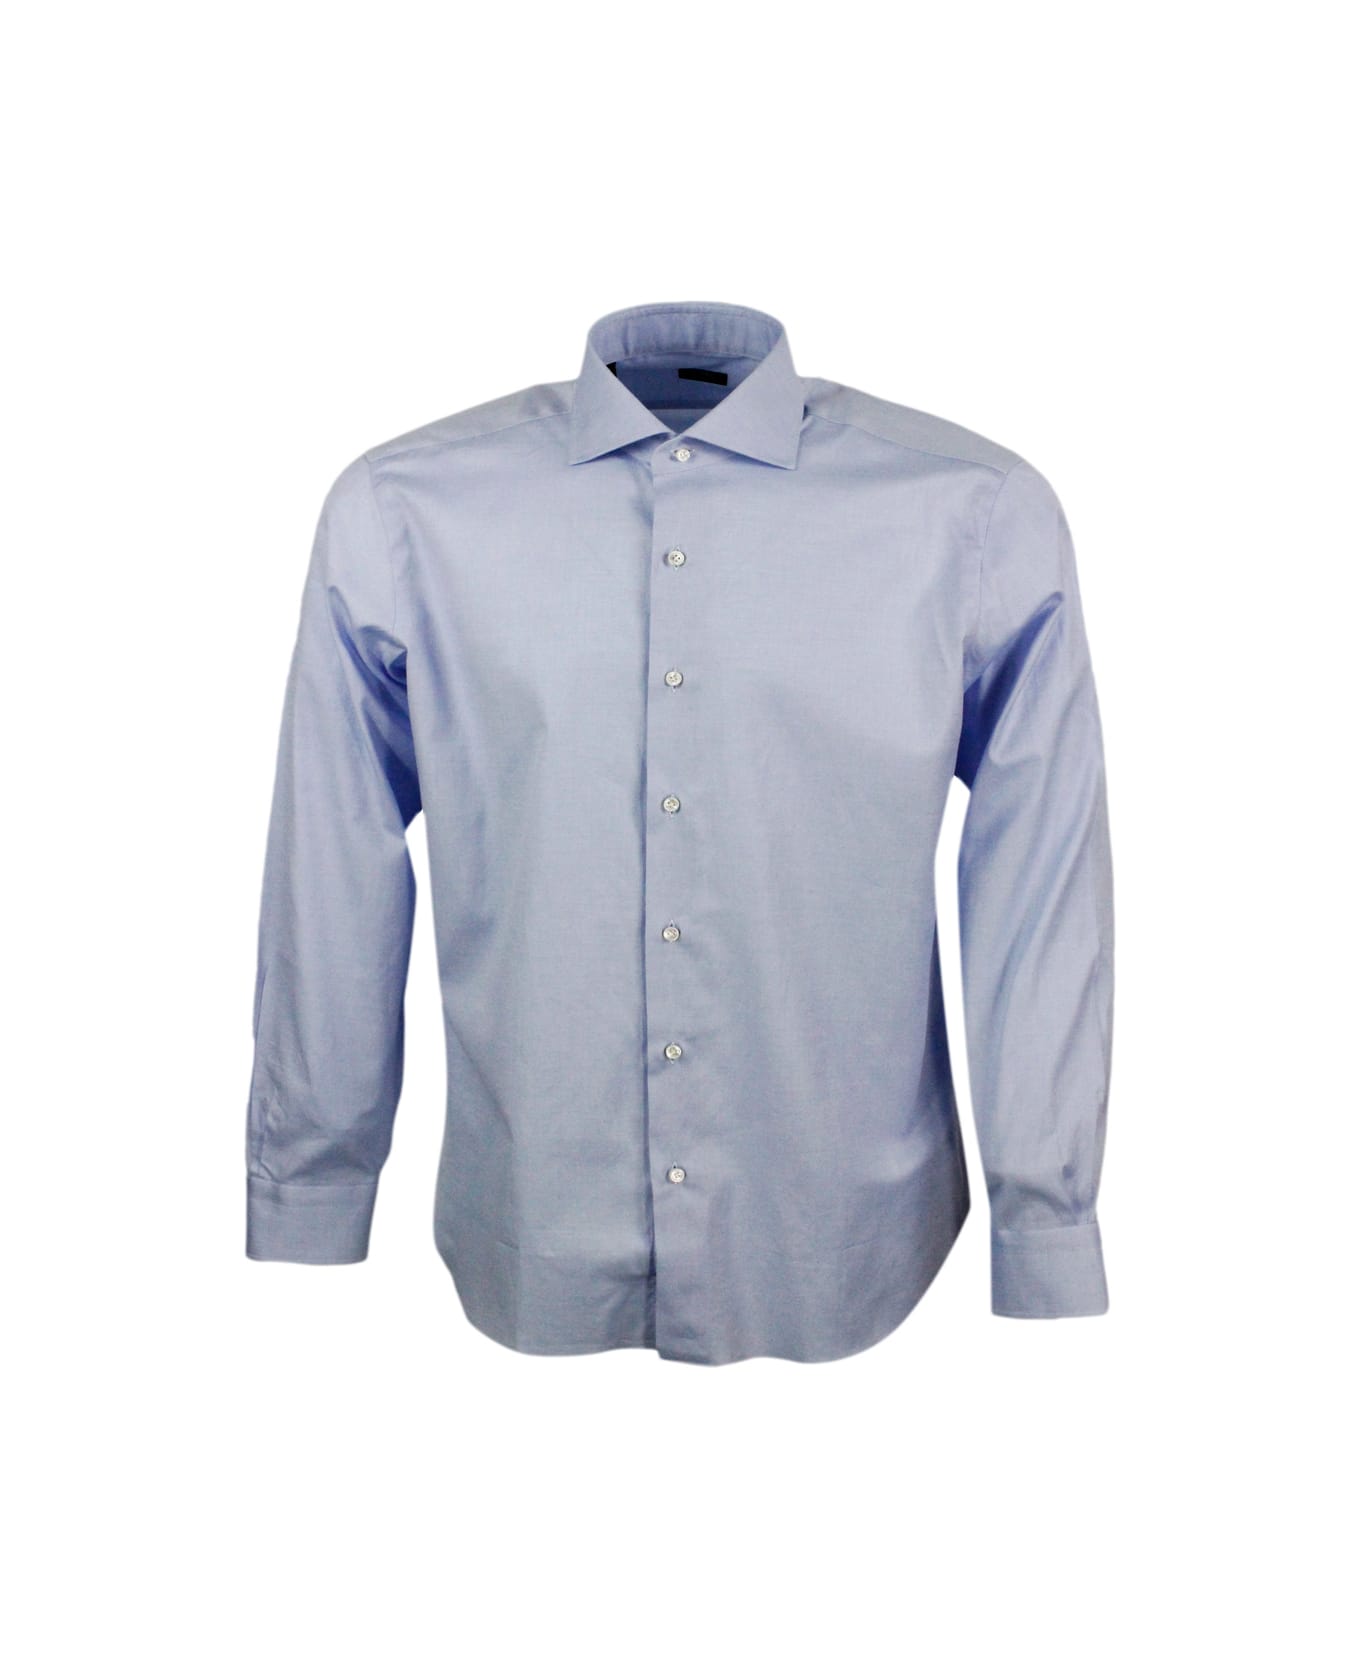 Barba Napoli Slim Fit Shirt In Fine Stretch Honeycomb Cotton, Italian Collar, Hand-sewn Black Label And Mother-of-pearl Buttons - Light Blu シャツ